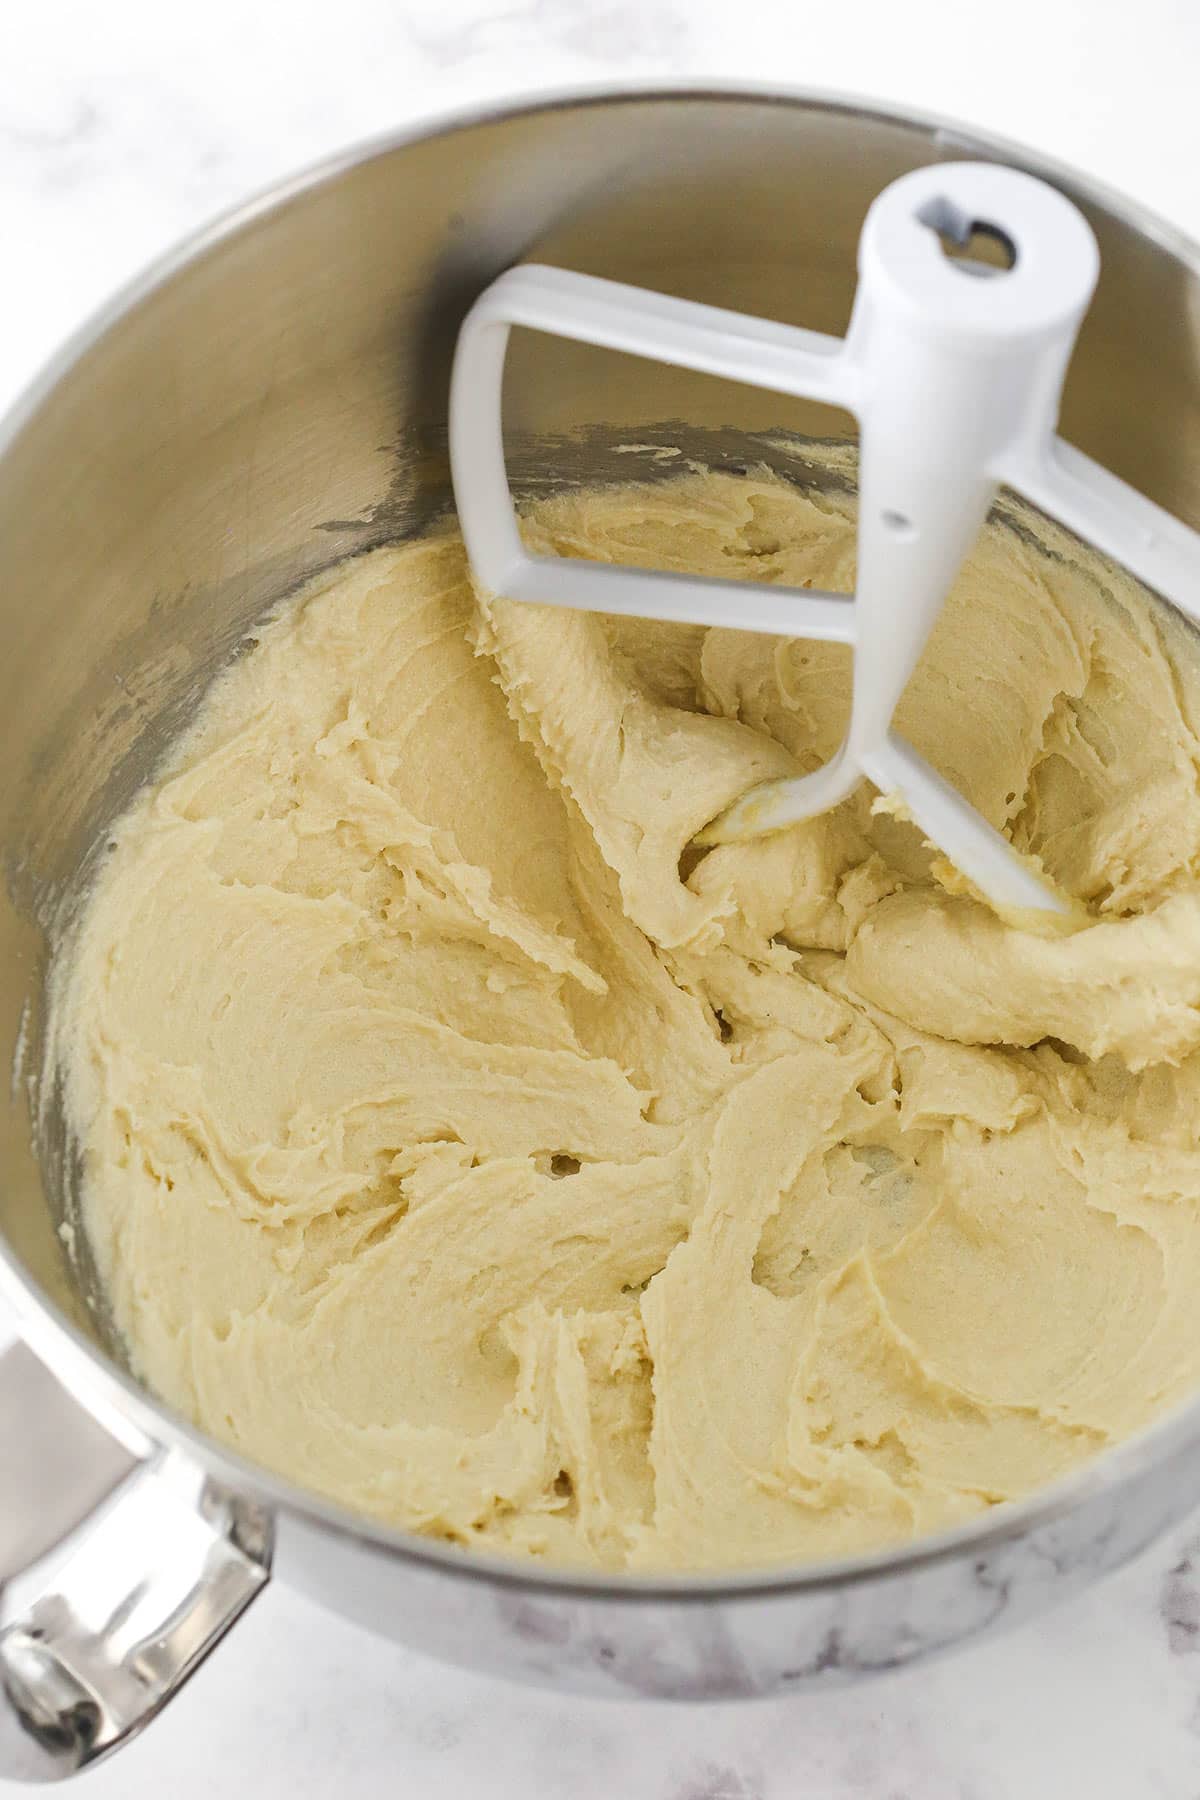 Creamed butter and sugar inside of a large metal mixing bowl with the whisk attachment inside.